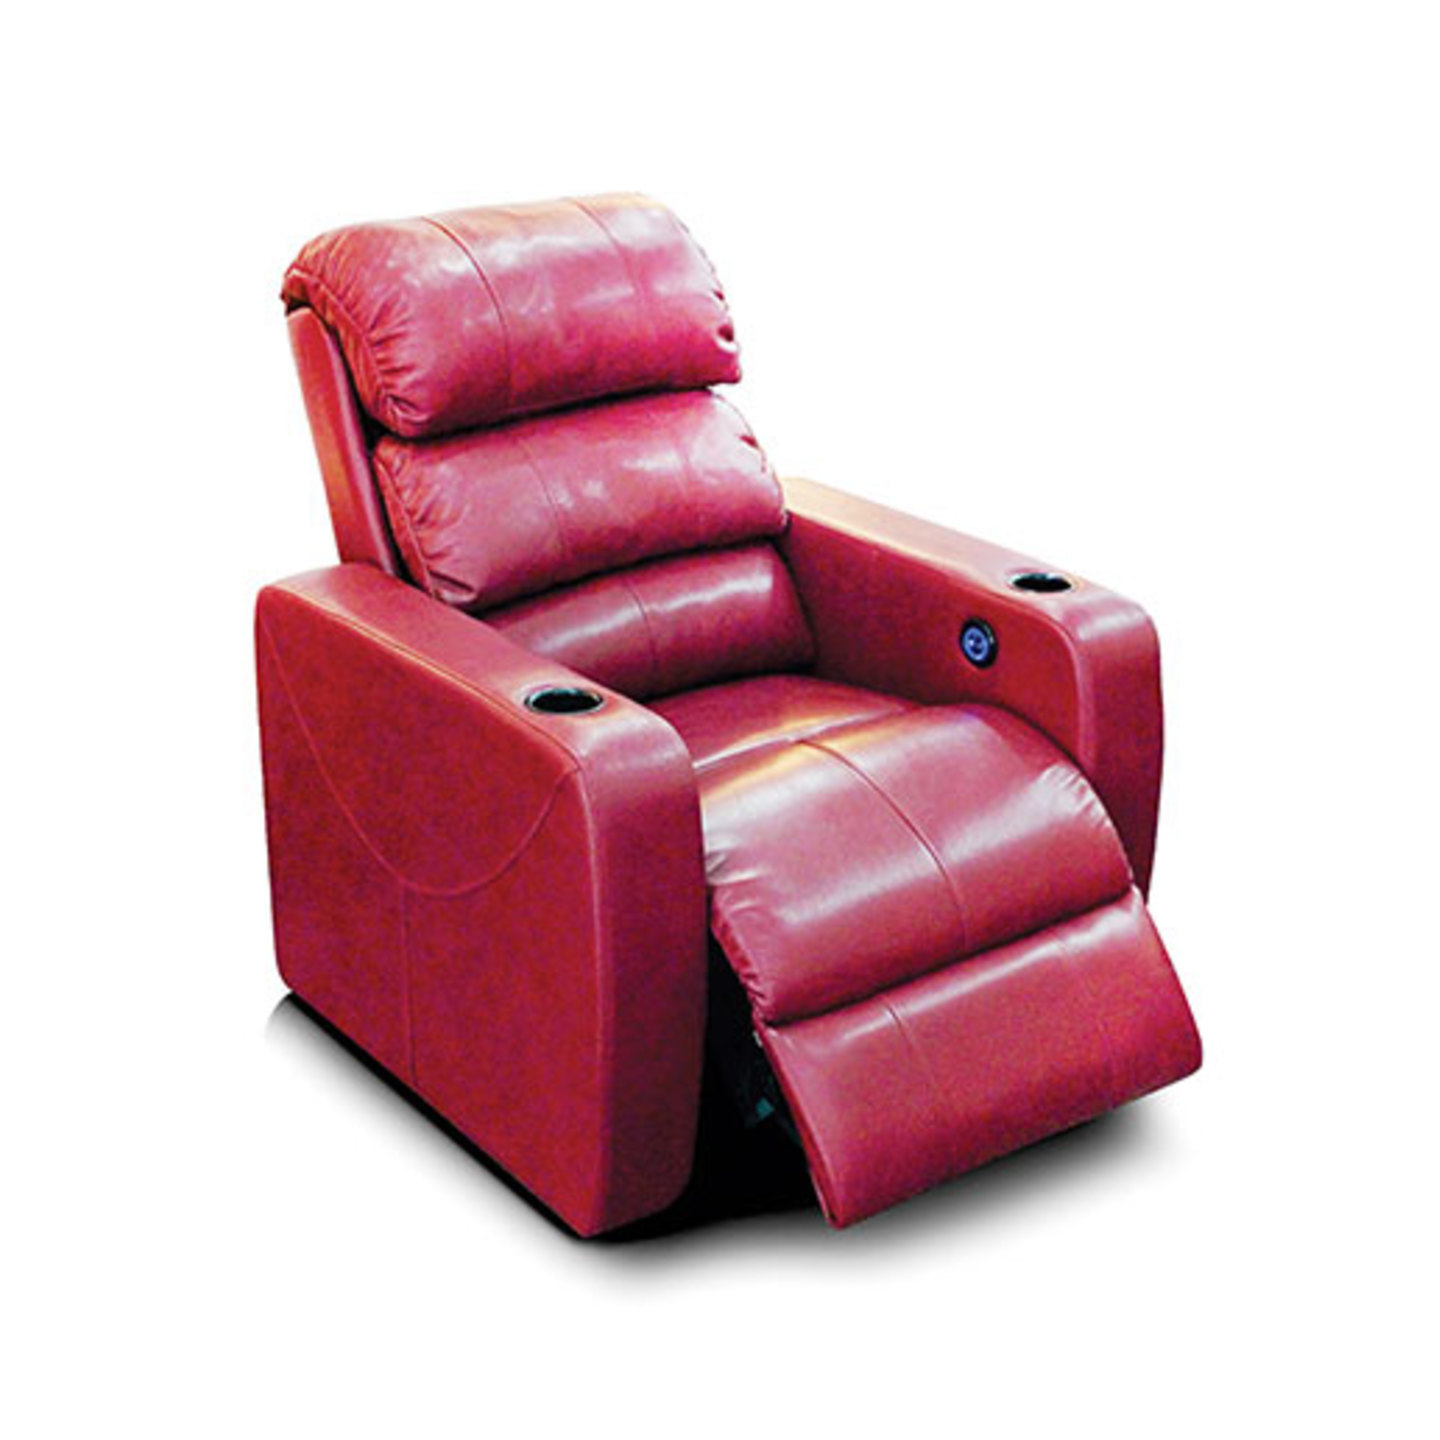 LN Recliner Chair Millor Manual System In Red Colour